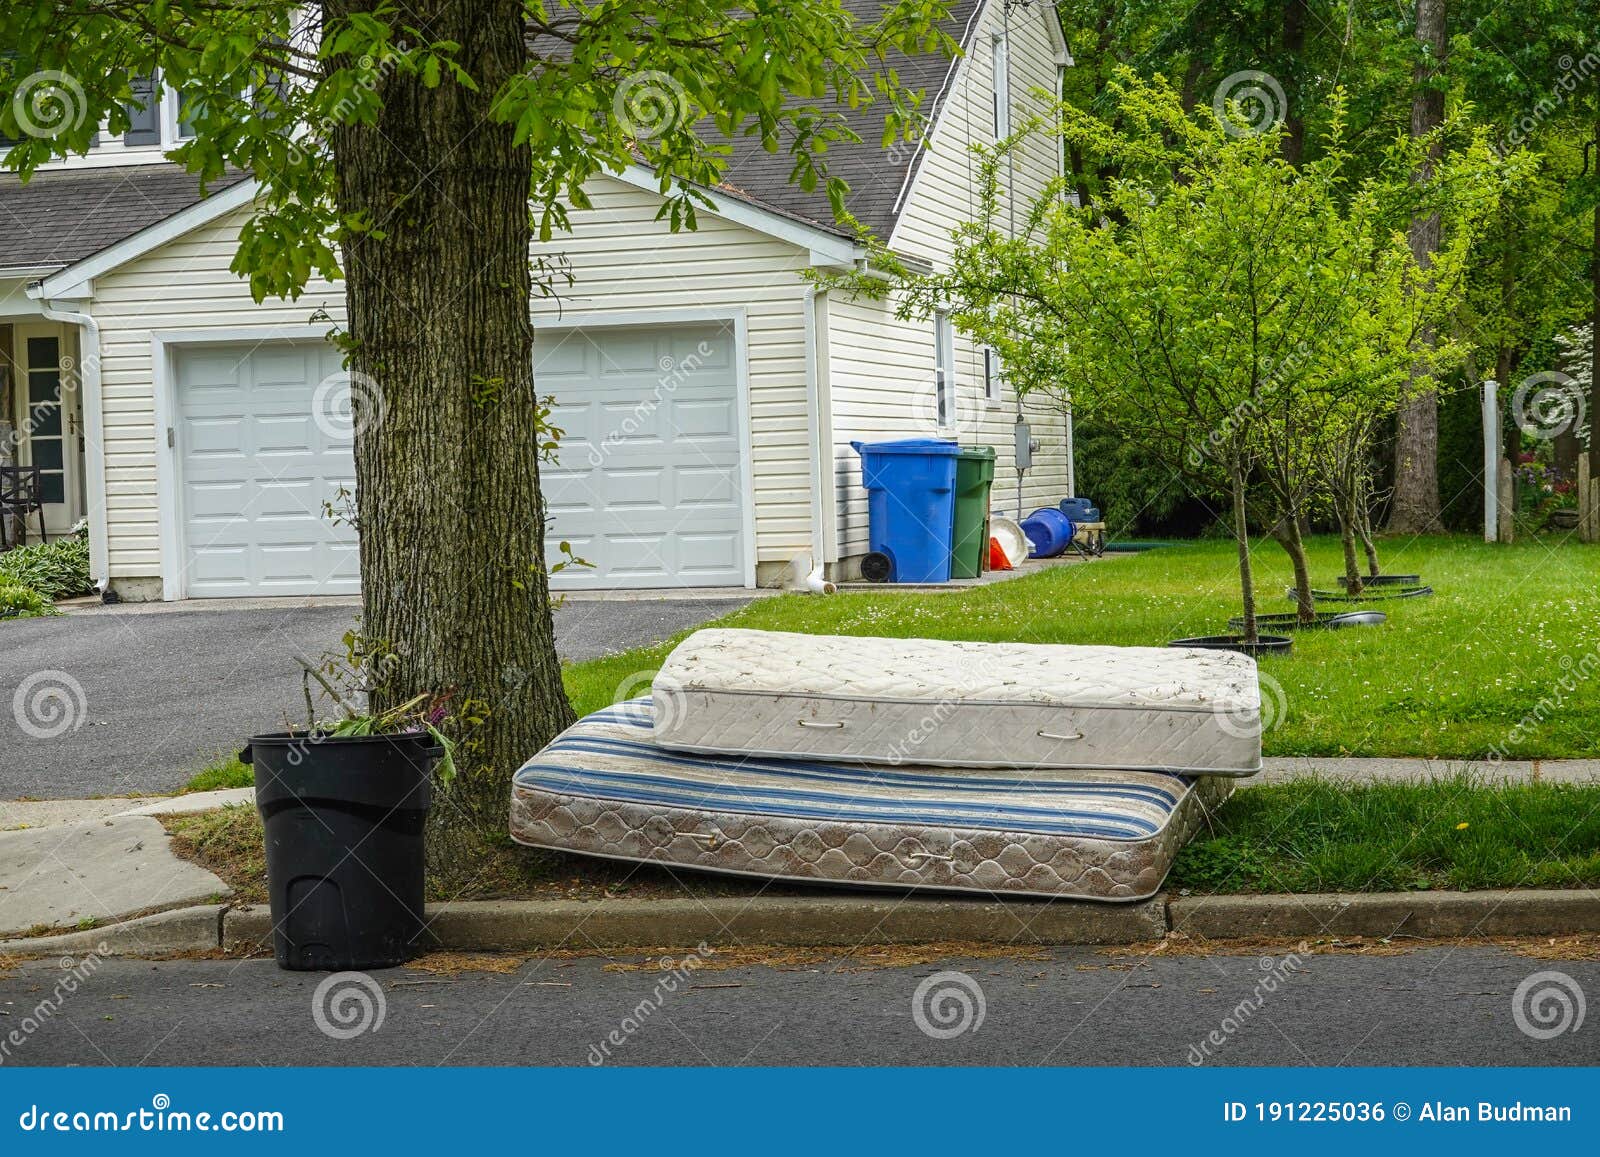 two old worn out mattresses by a tree at the curb near a trash can in front of a house